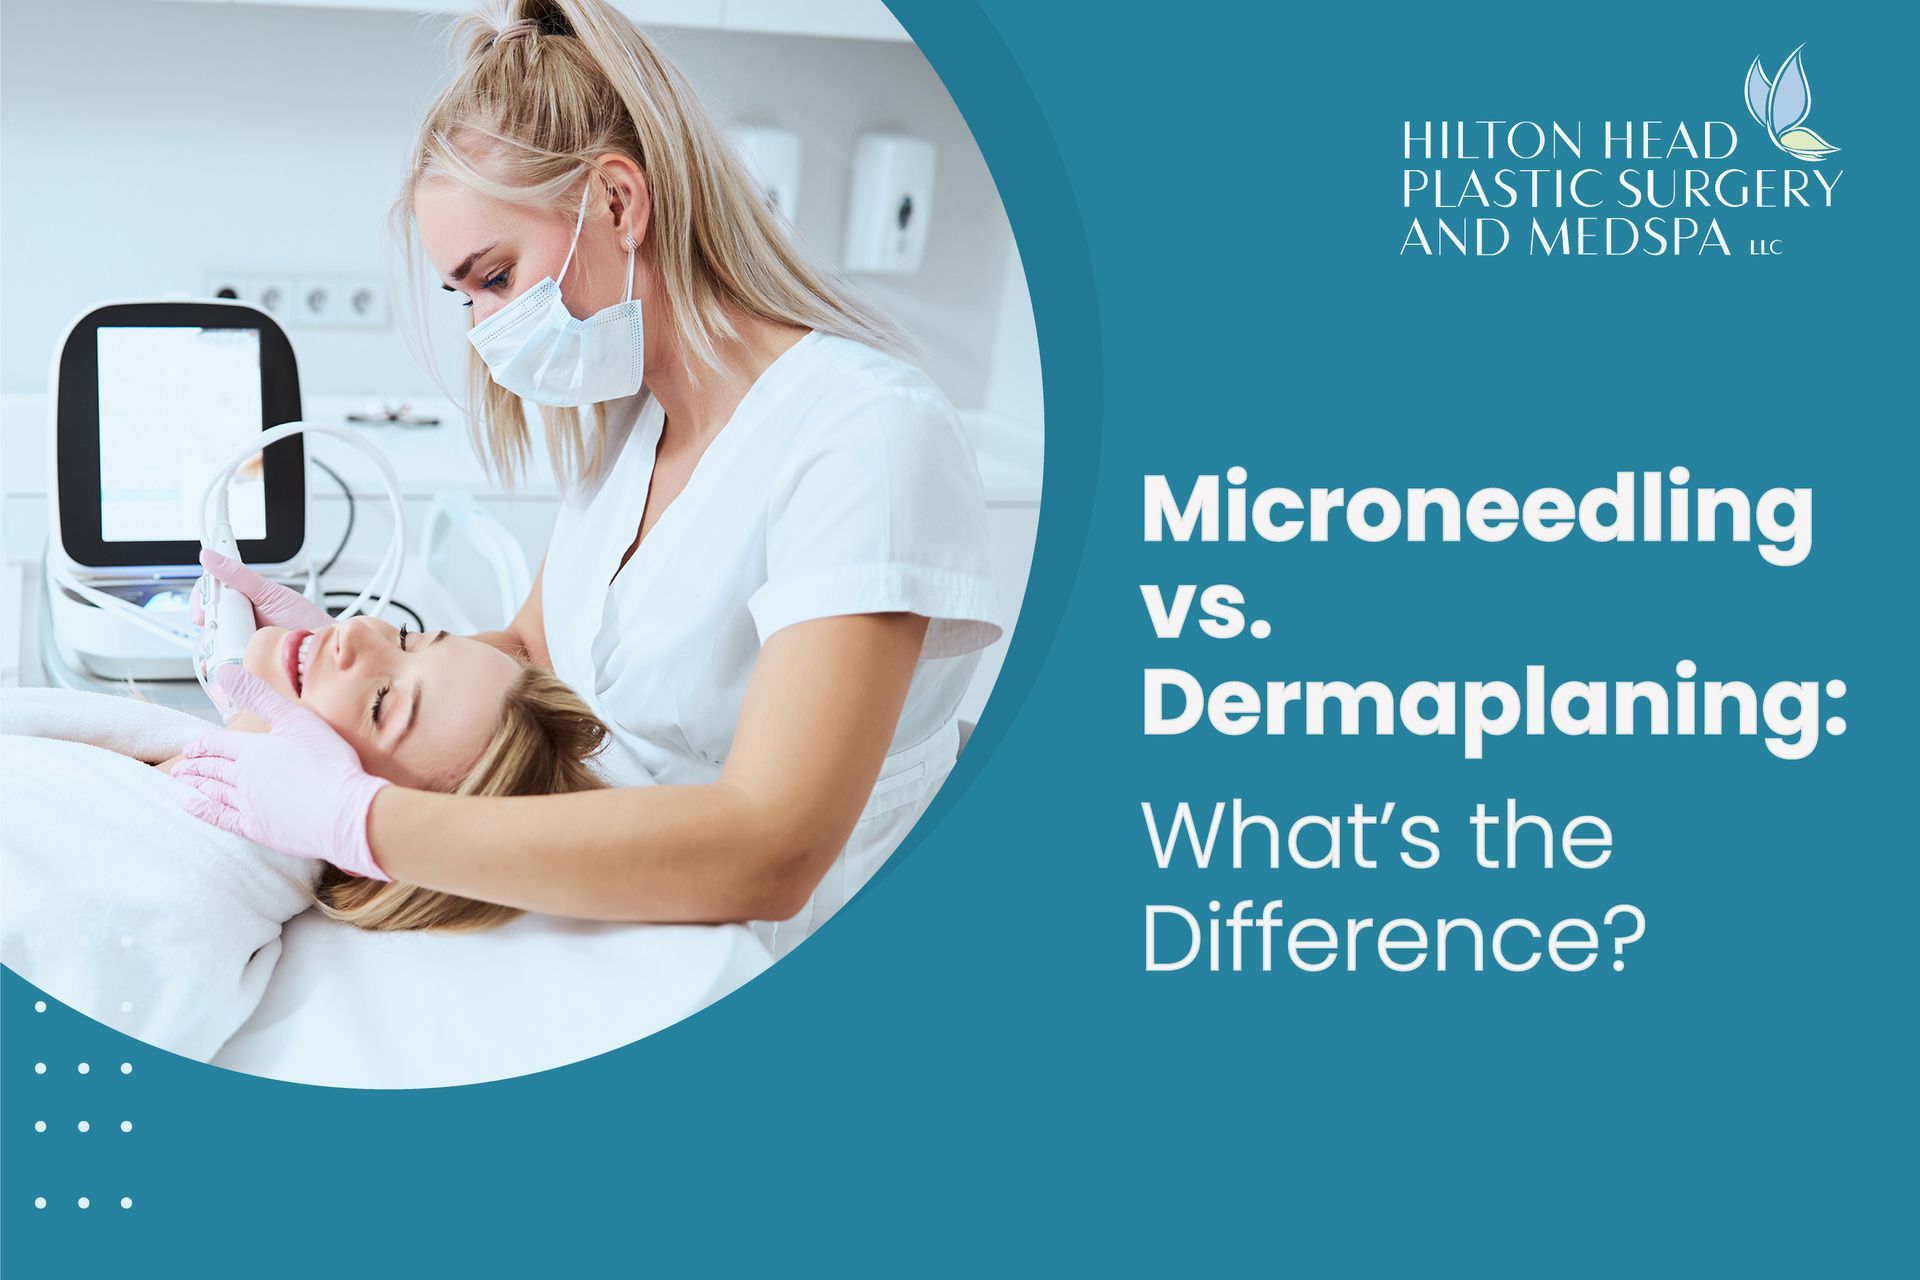 Microneedling vs. Dermaplaning: What’s the Difference?